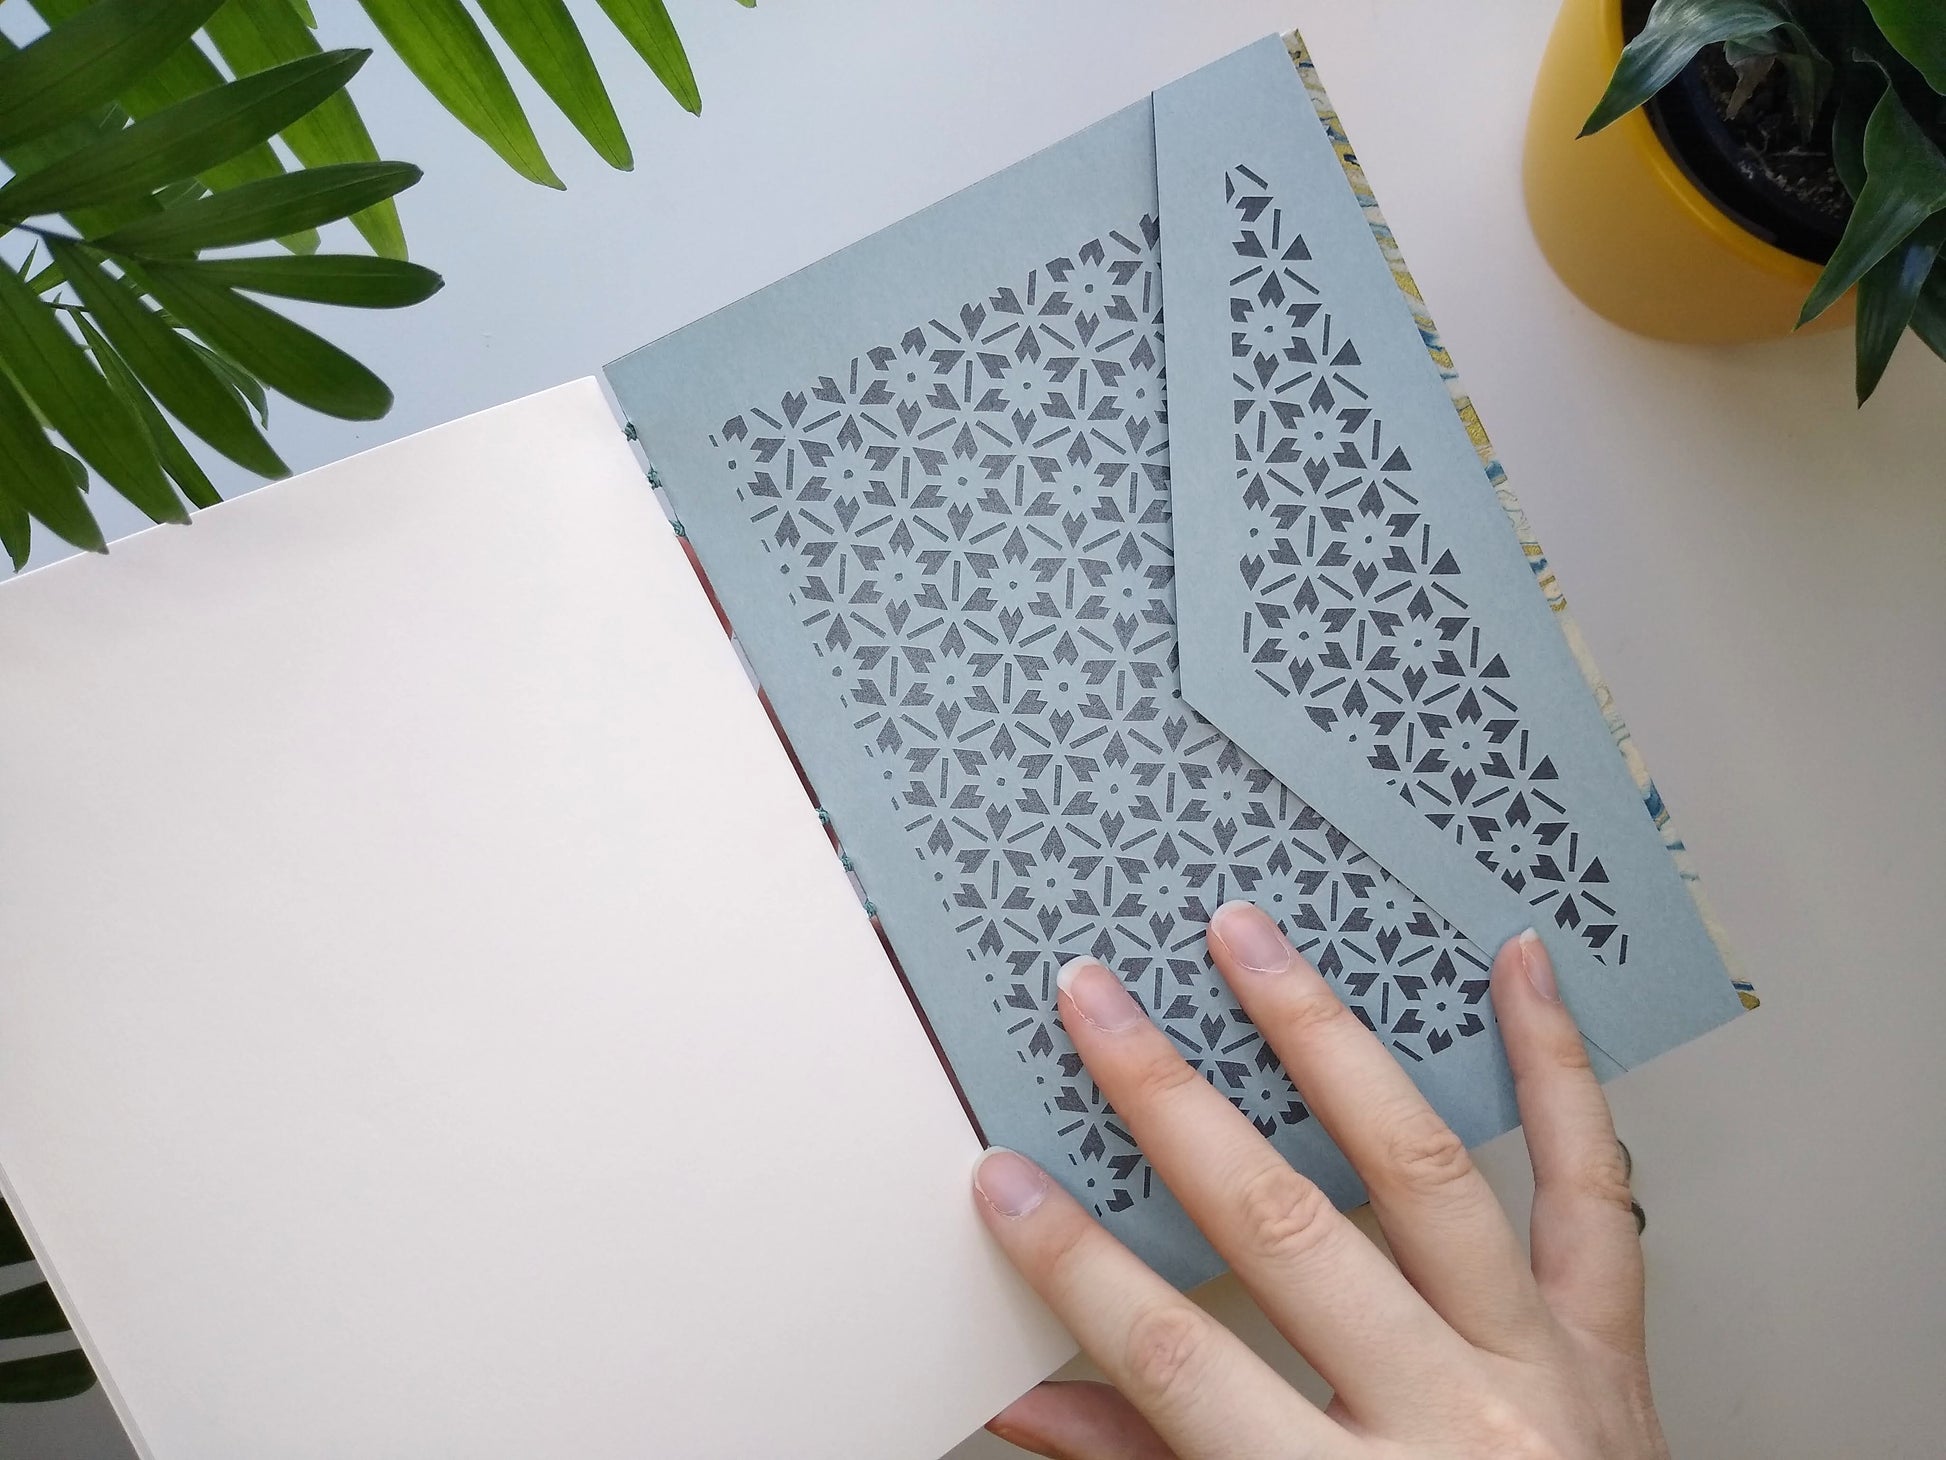 A journal is held open by a hand, showing a blue envelope at the back. The envelope has a floral lattice design cut into it, backed with metallic grey paper. It's held over a white desk with two potted plants in view.